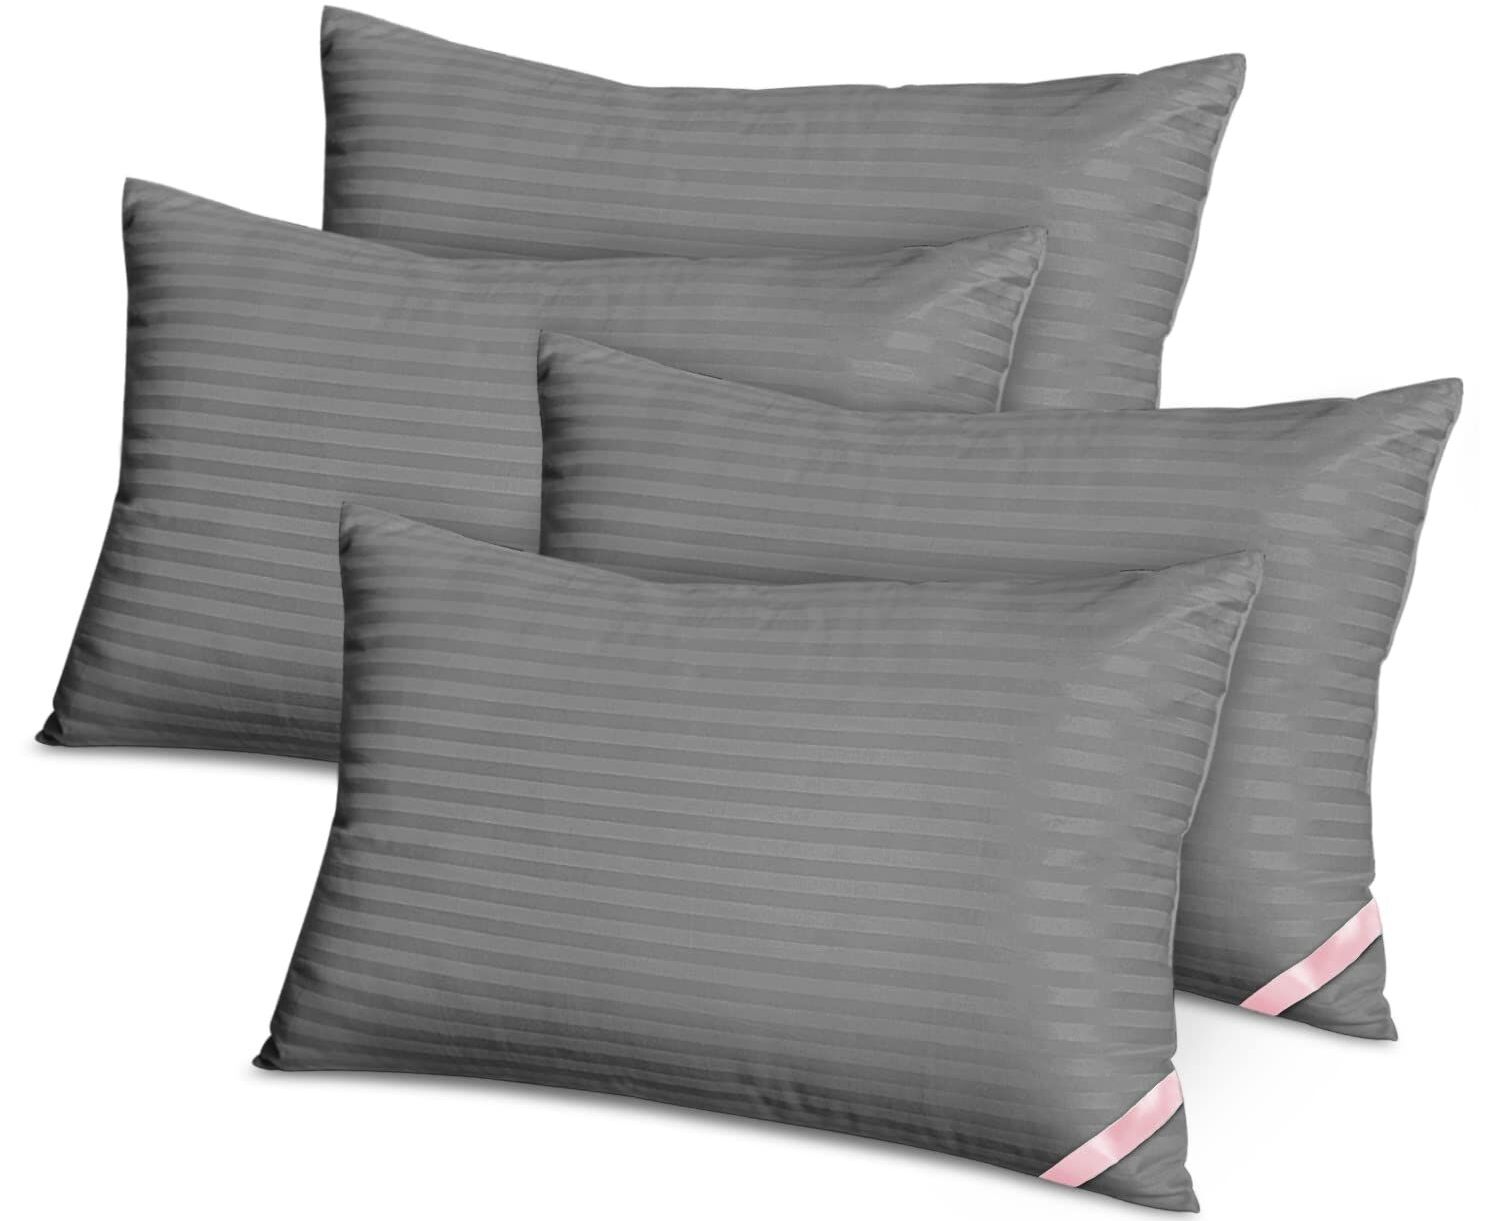 https://storables.com/wp-content/uploads/2023/10/10-incredible-pillows-for-sleeping-4-pack-for-2023-1697519027.jpg